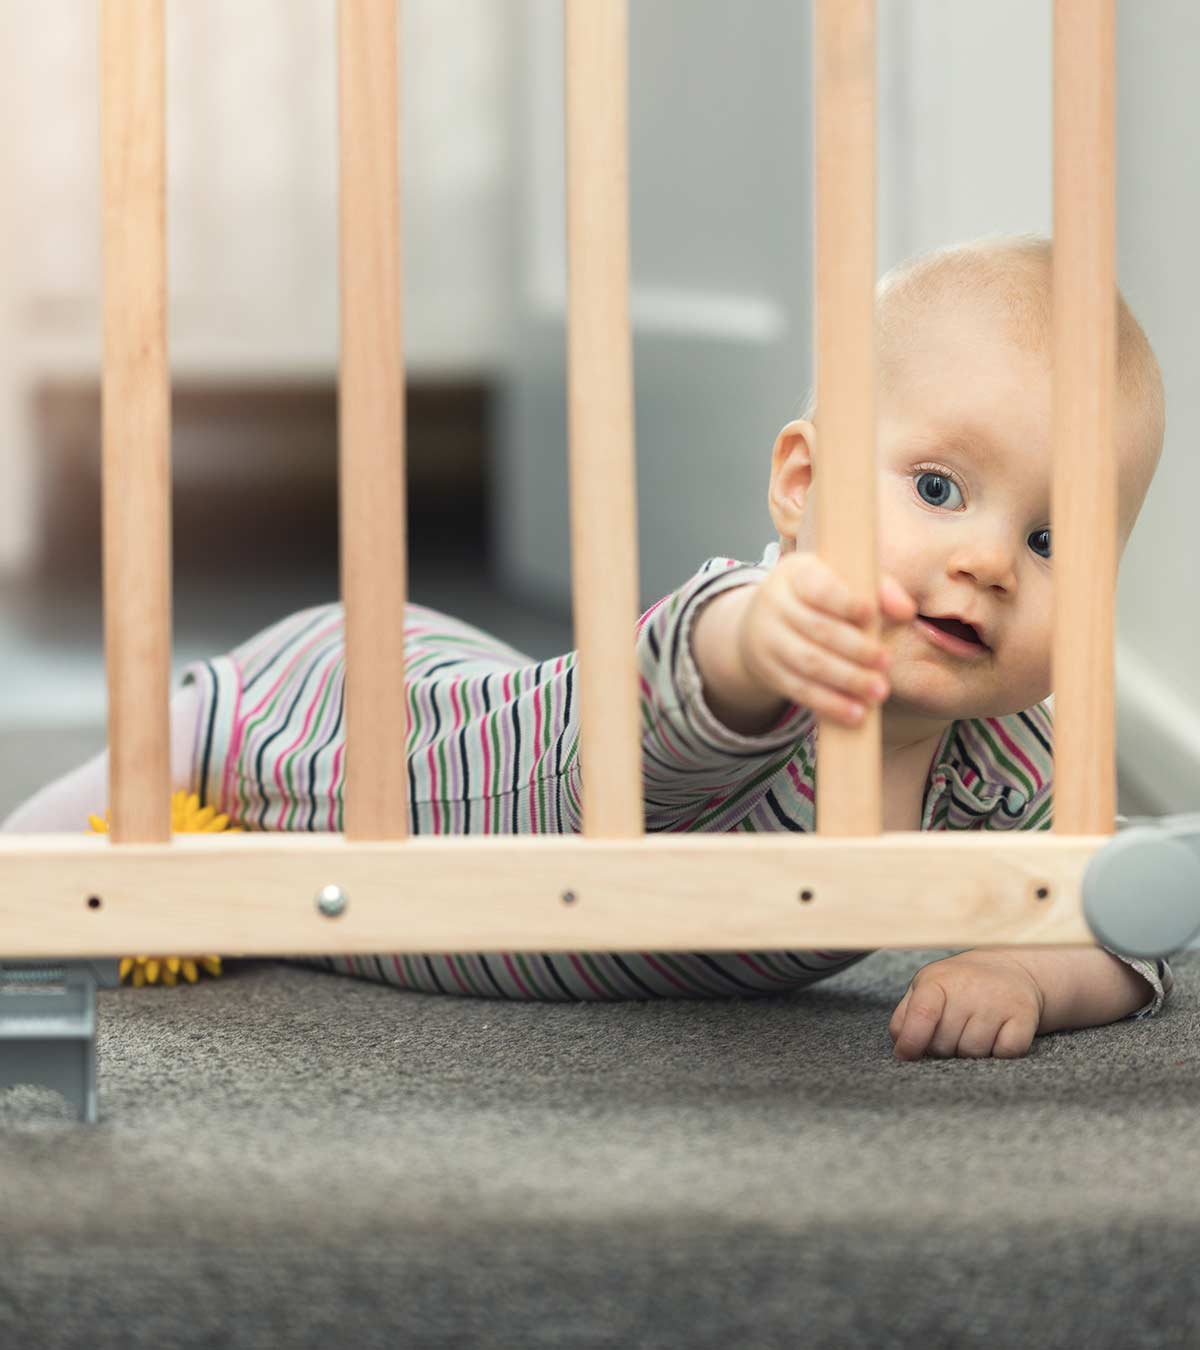 Planning To Get A Baby Gate Here’s What You Need To Know